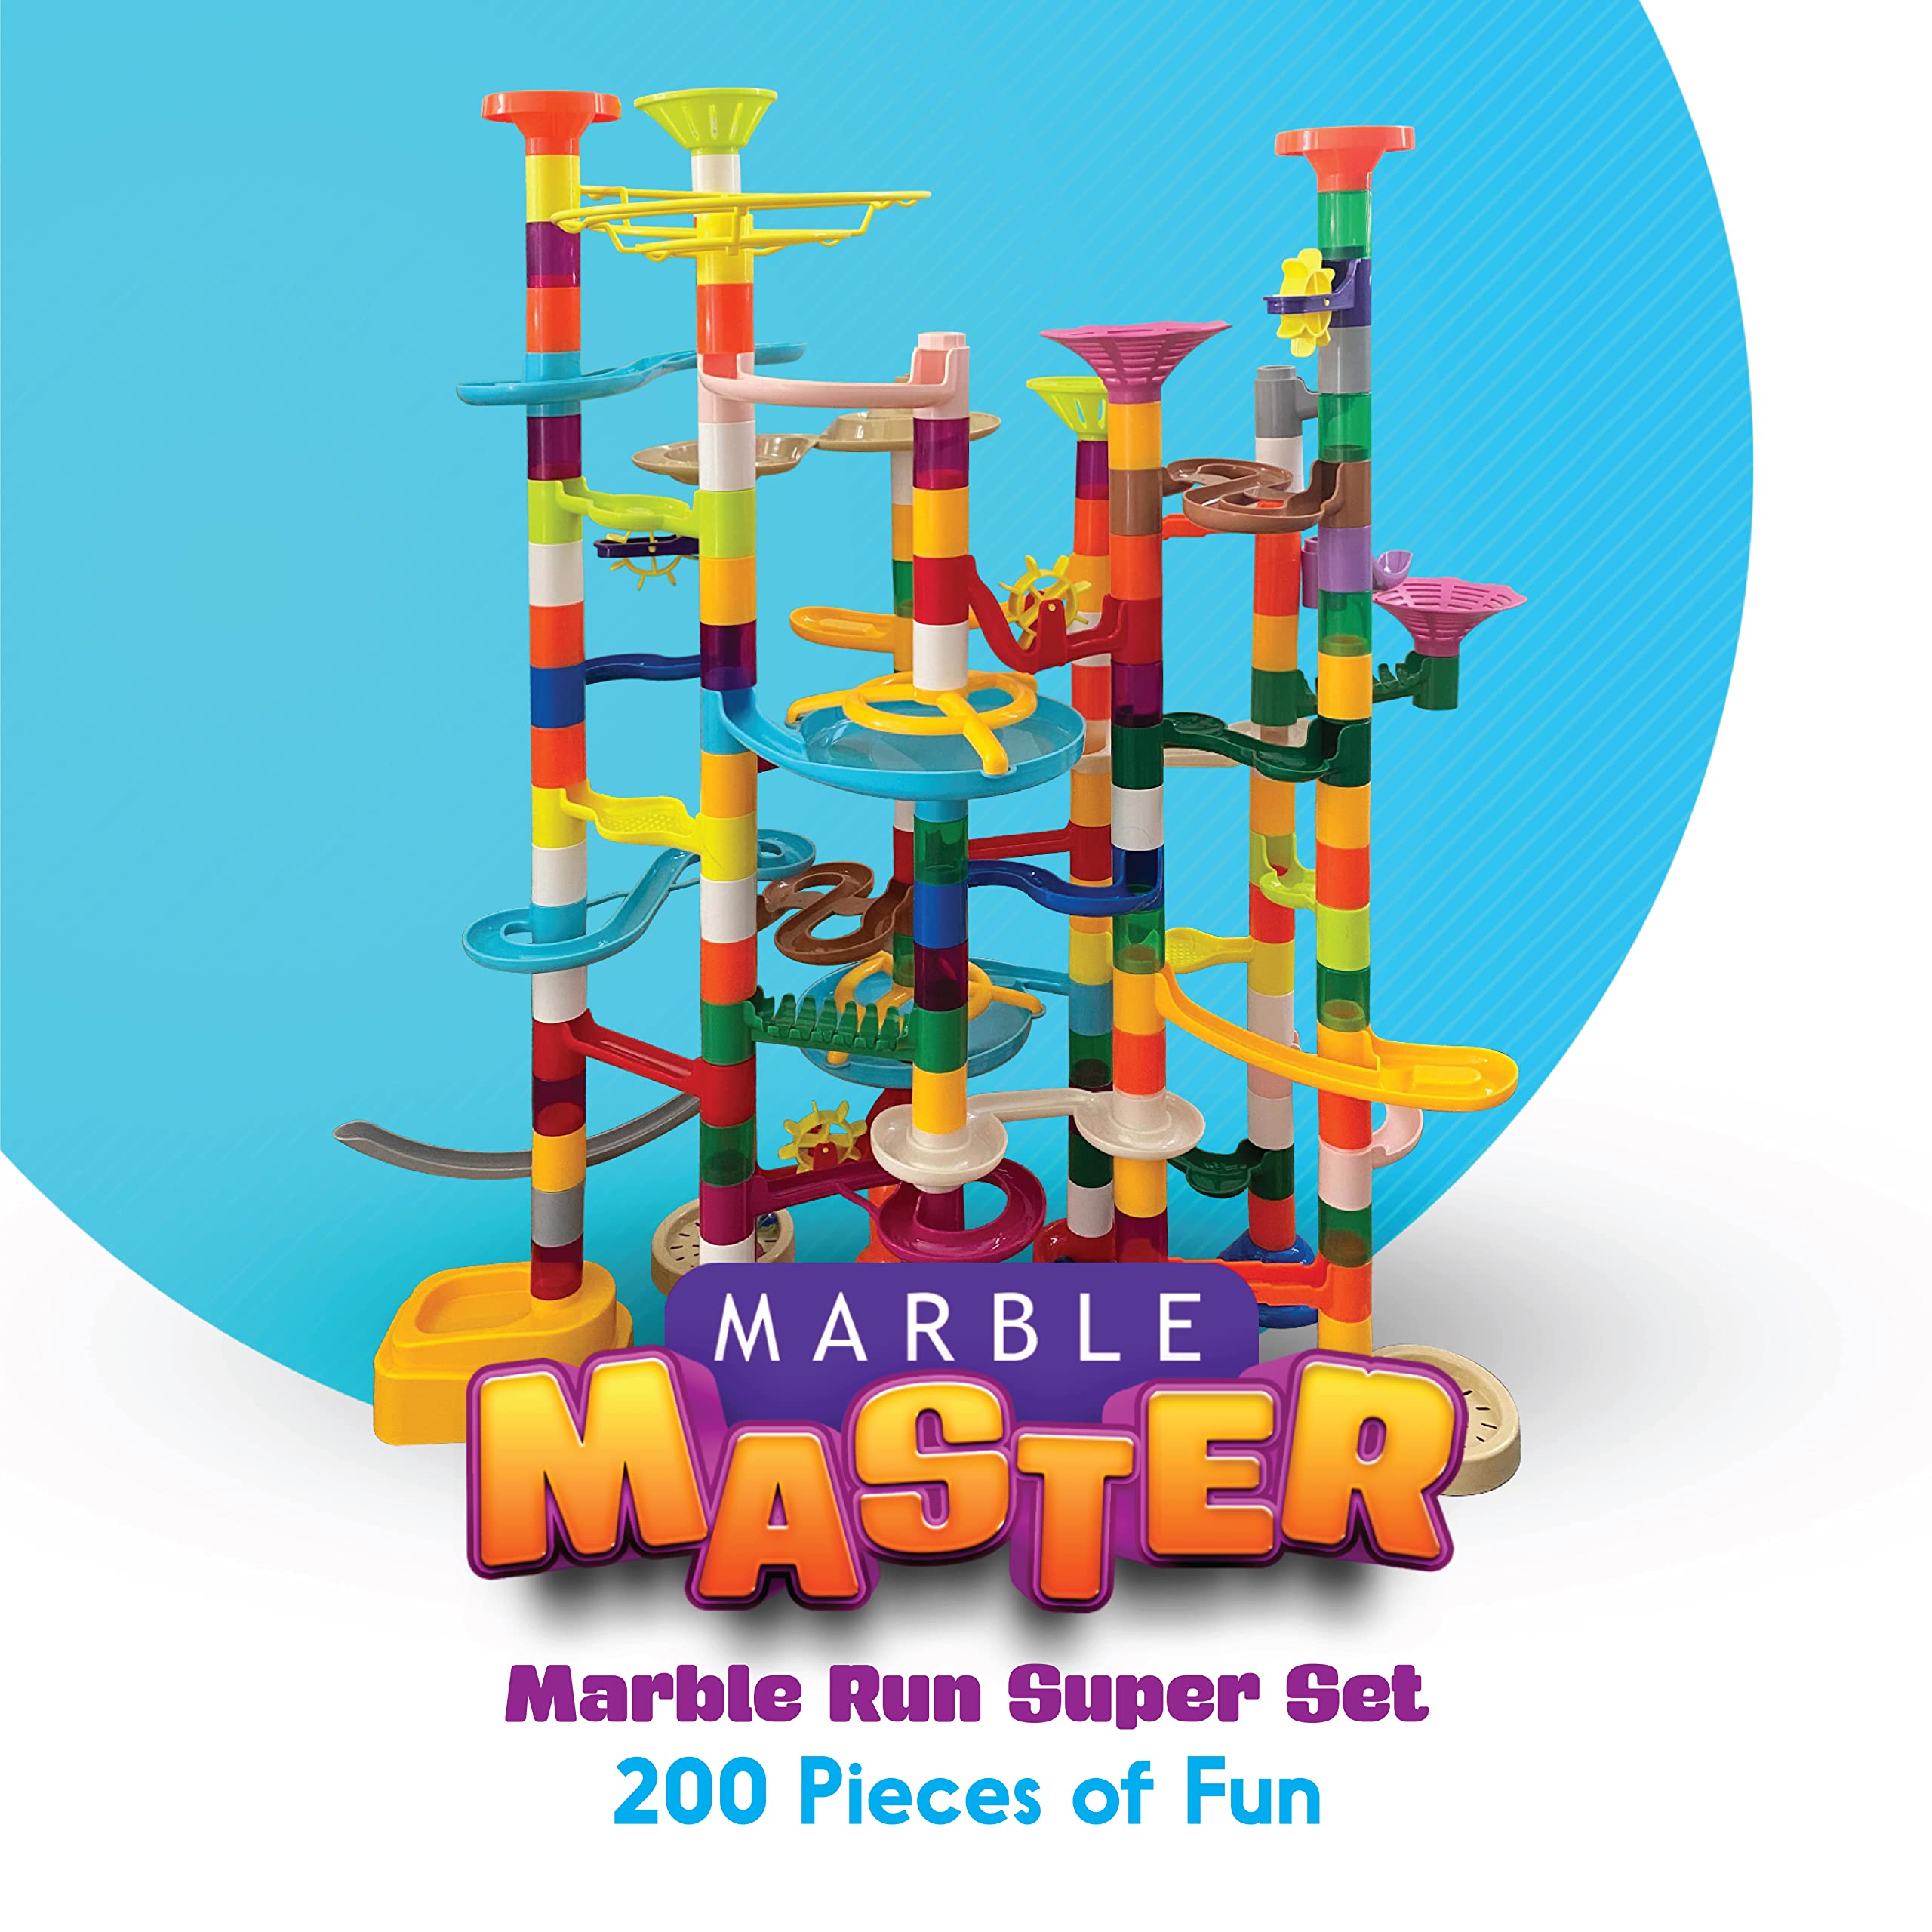 Marble Master Marble Run - 200pc Building Set & Glow in The Dark Glass Marbles for Boys & Girls, Build Large Roller Coaster Tracks & Racing Circuit Runs, STEM Toy Track Builder Kit for Kids Ages 8-12